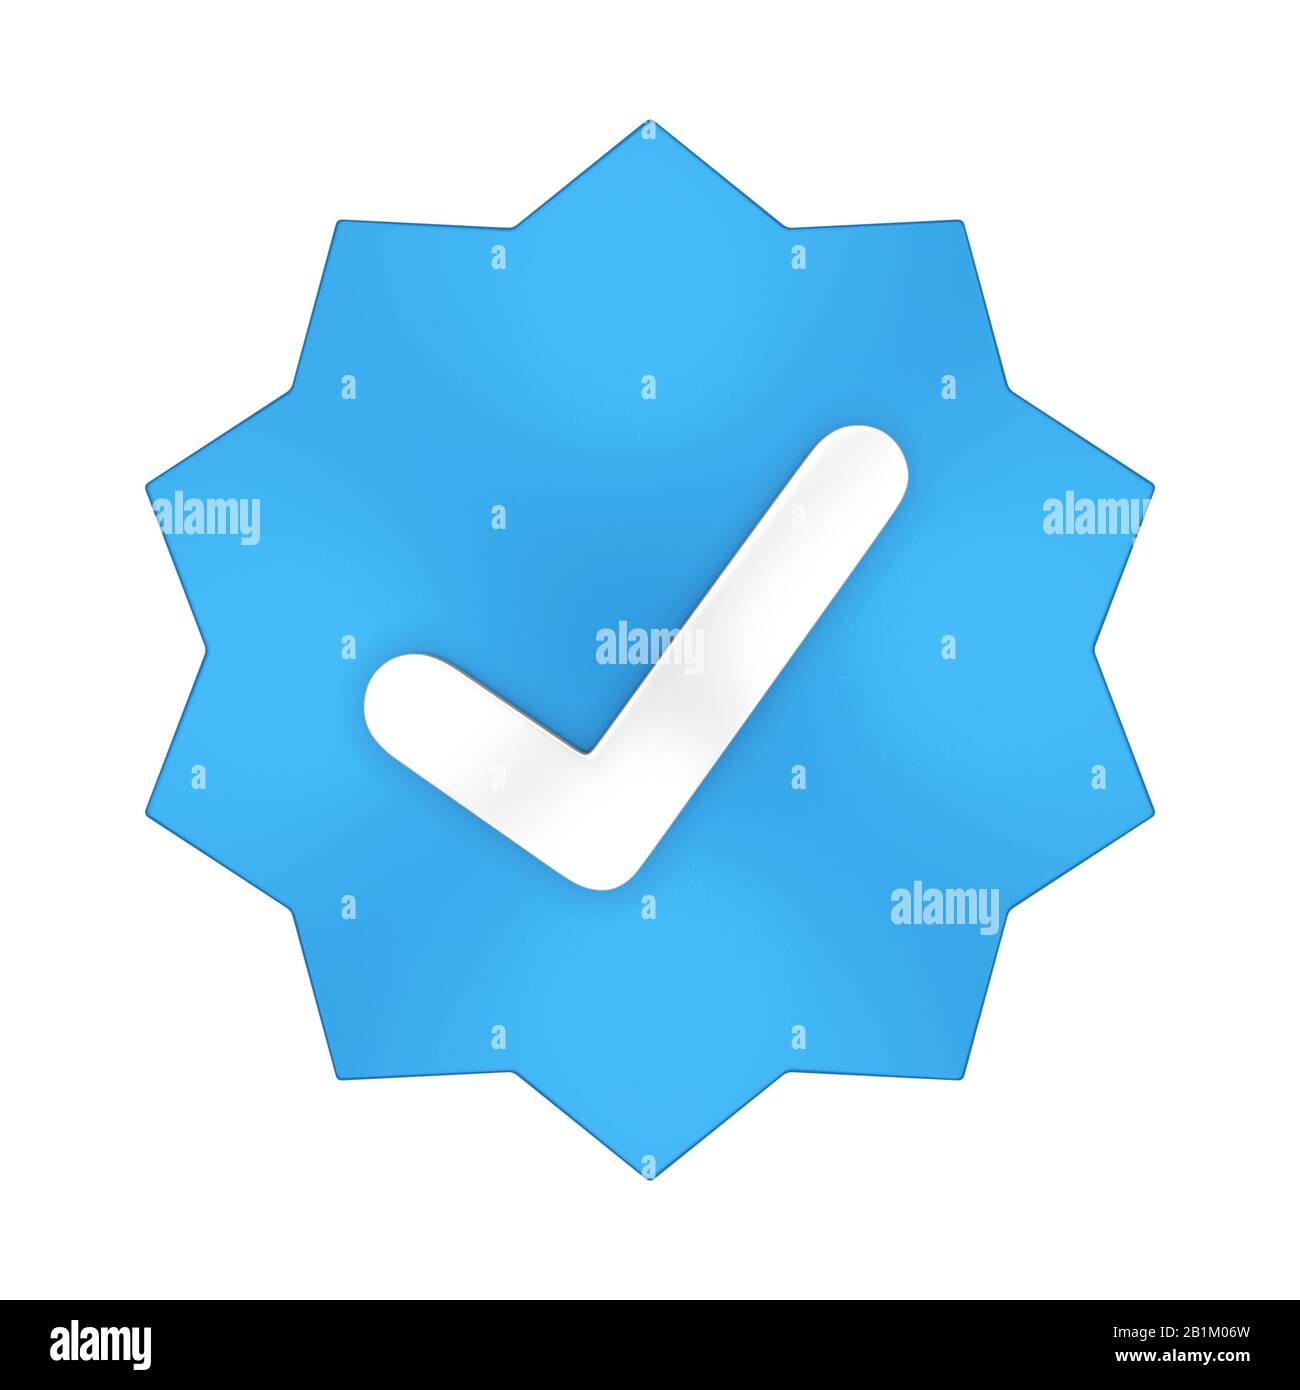 Check Mark Icons Green Tick And Red Cross Logo Verified Checkmark Emoji  Verification Badge Verified Account Symbol Similar To Twitter Stock  Illustration - Download Image Now - iStock